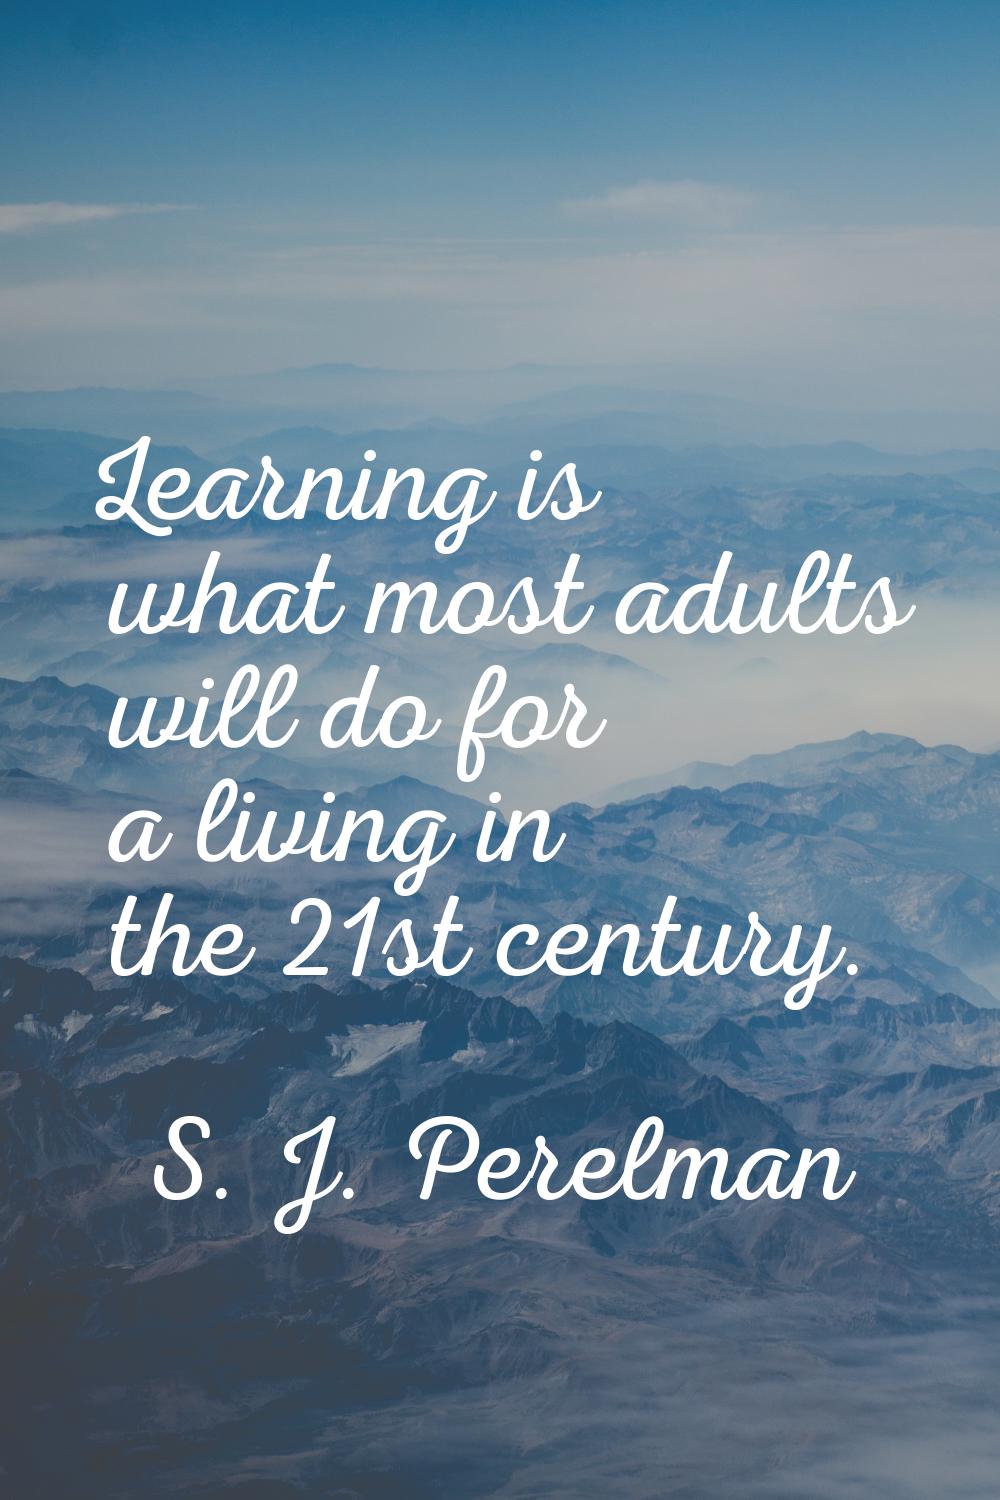 Learning is what most adults will do for a living in the 21st century.